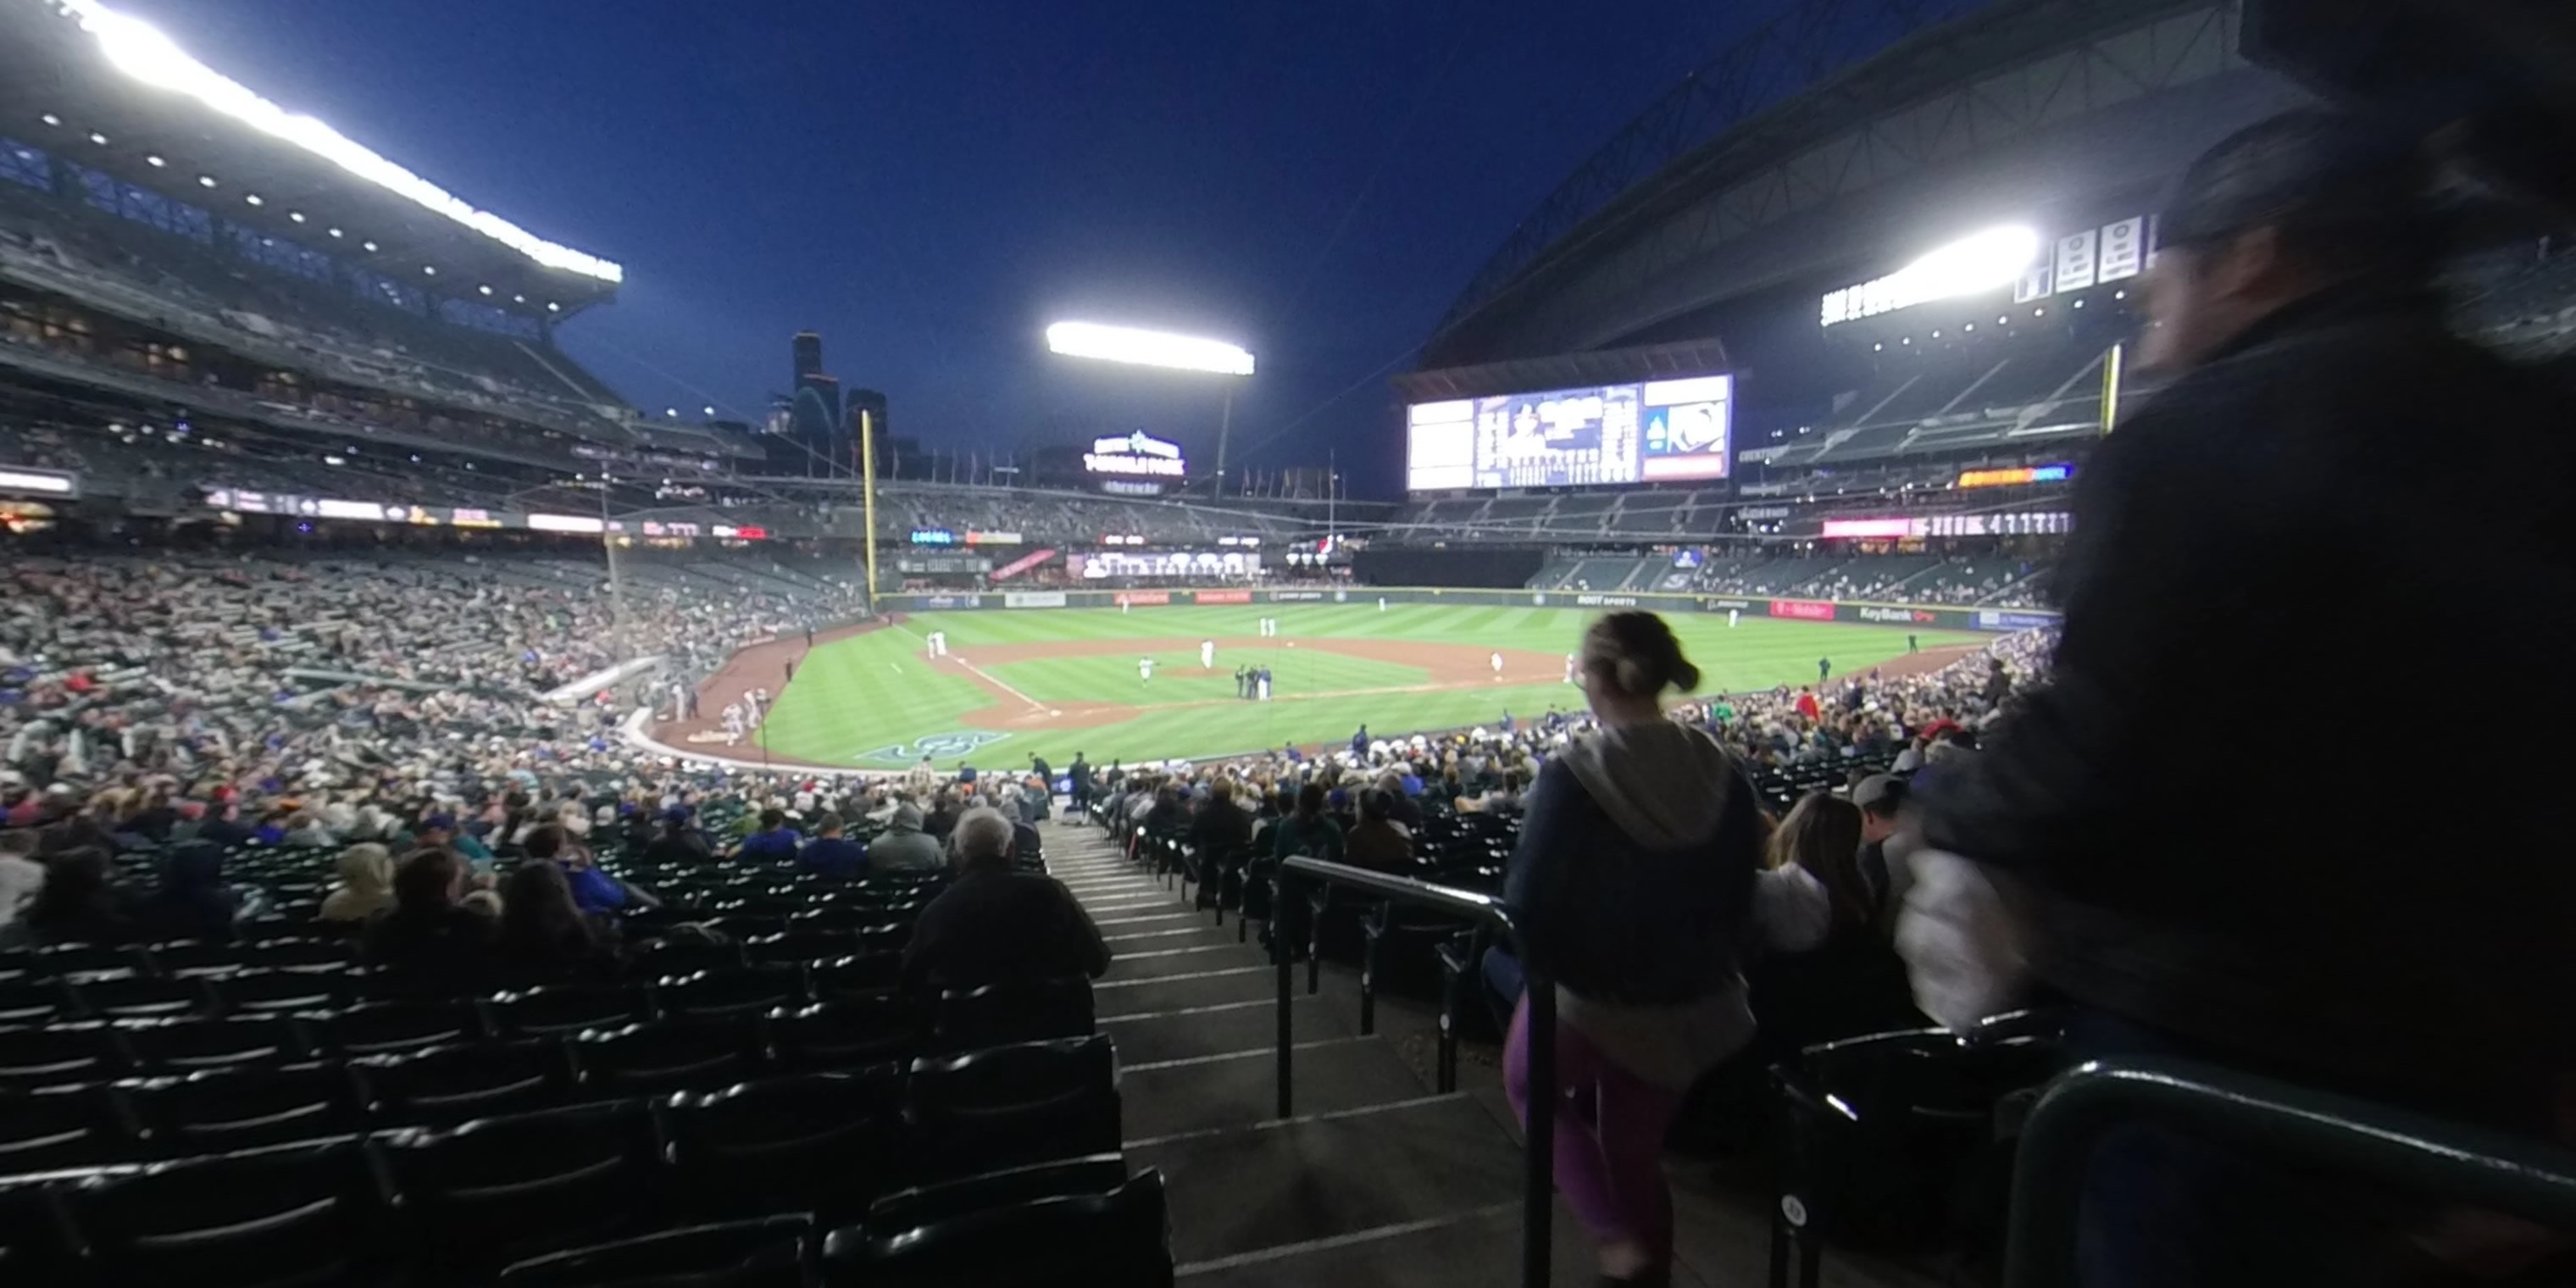 section 126 panoramic seat view  for baseball - t-mobile park